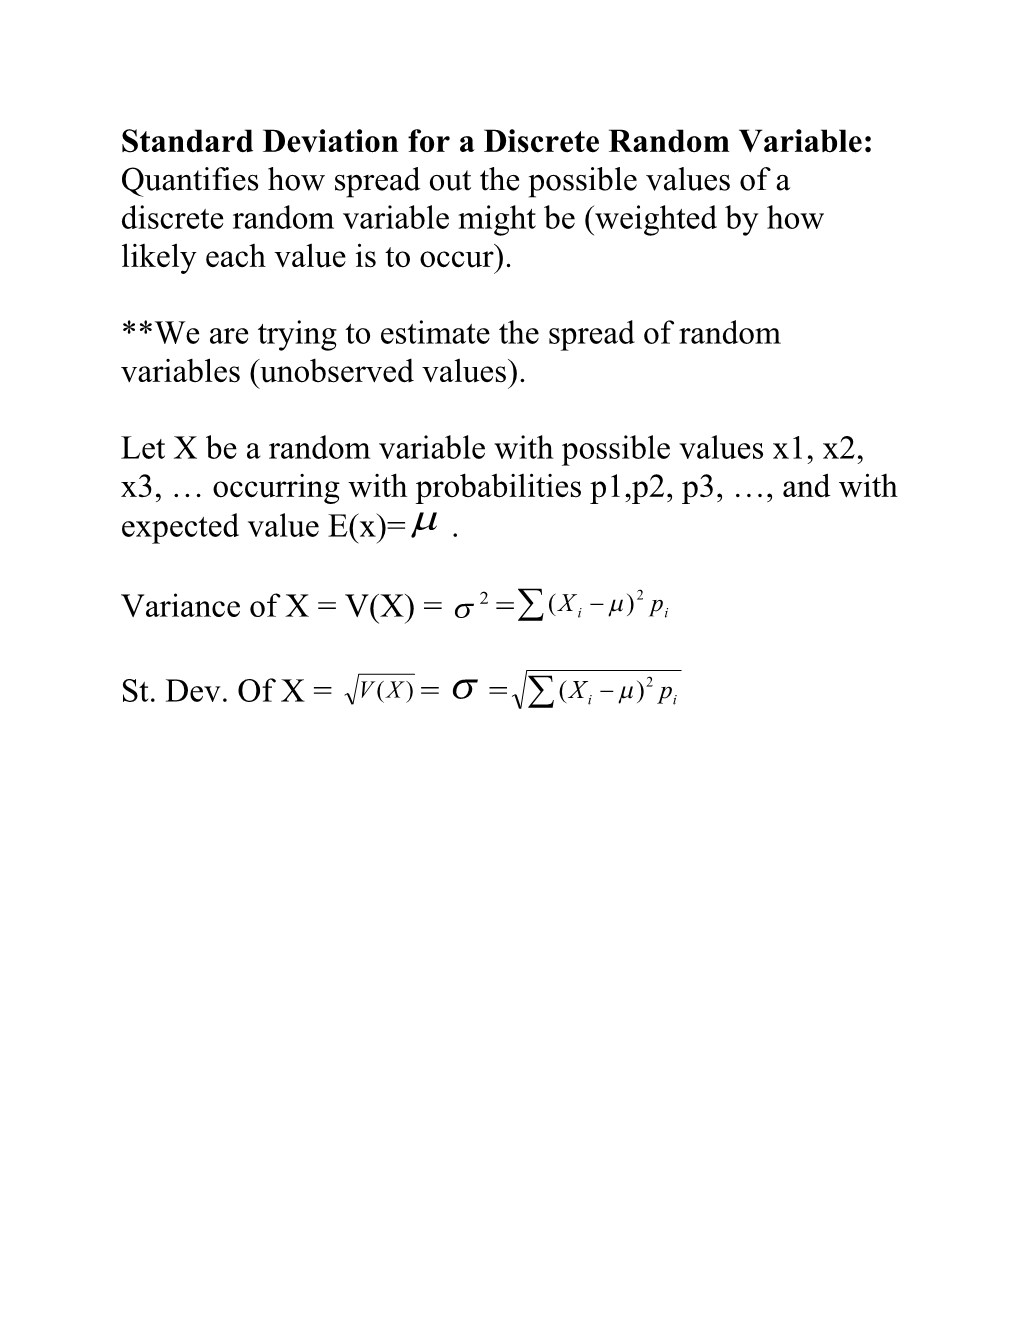 Standard Deviation for a Discrete Random Variable: Quantifies How Spread out the Possible